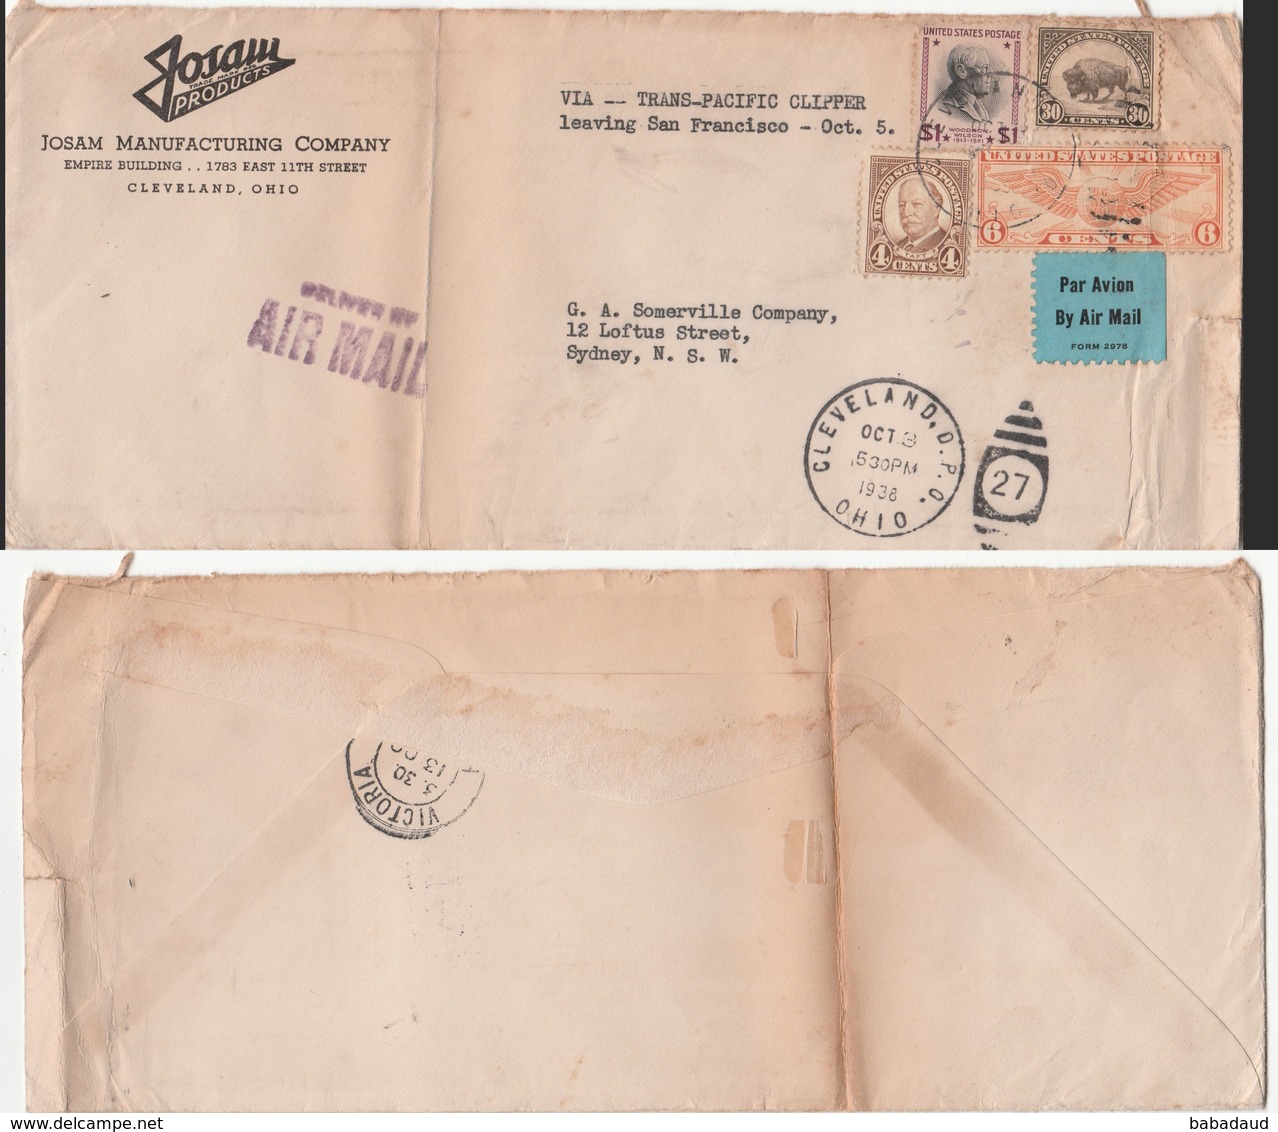 U.S.A. Air Mial Cover Franked $1.40, CLEVELAND OHIO OCT 3 1938 > Sydney, Australia, VICTORIA (HONG KONG) Transit - 1c. 1918-1940 Lettres